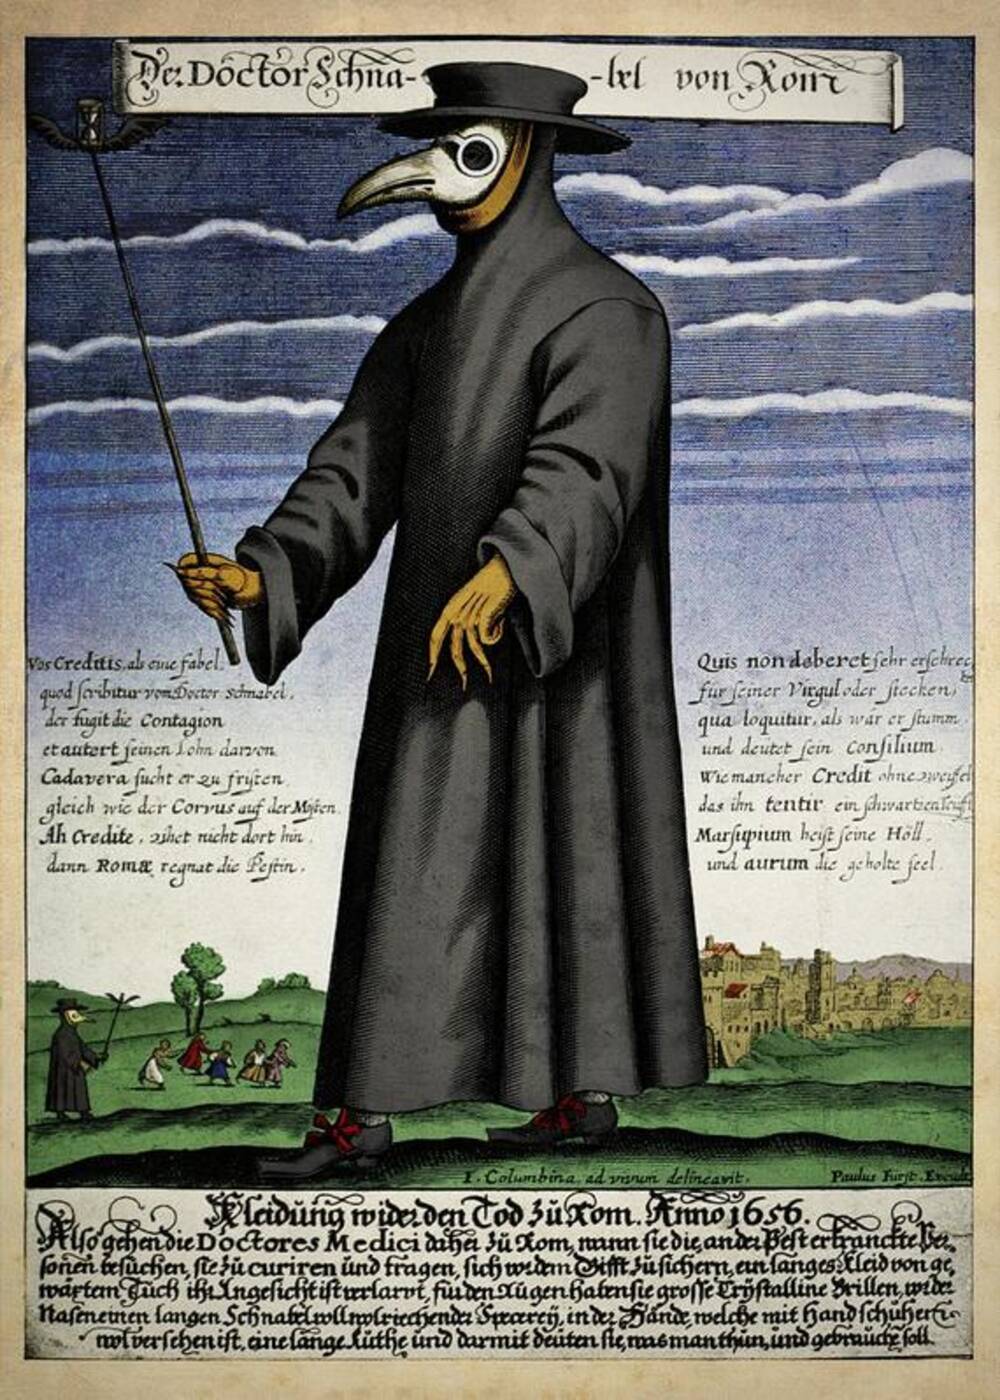 Illustration of a plague doctor in a long black cloak, with a bird-like mask with a long beak. There is medieval'style script at the bottom and in the middle of the illustration.